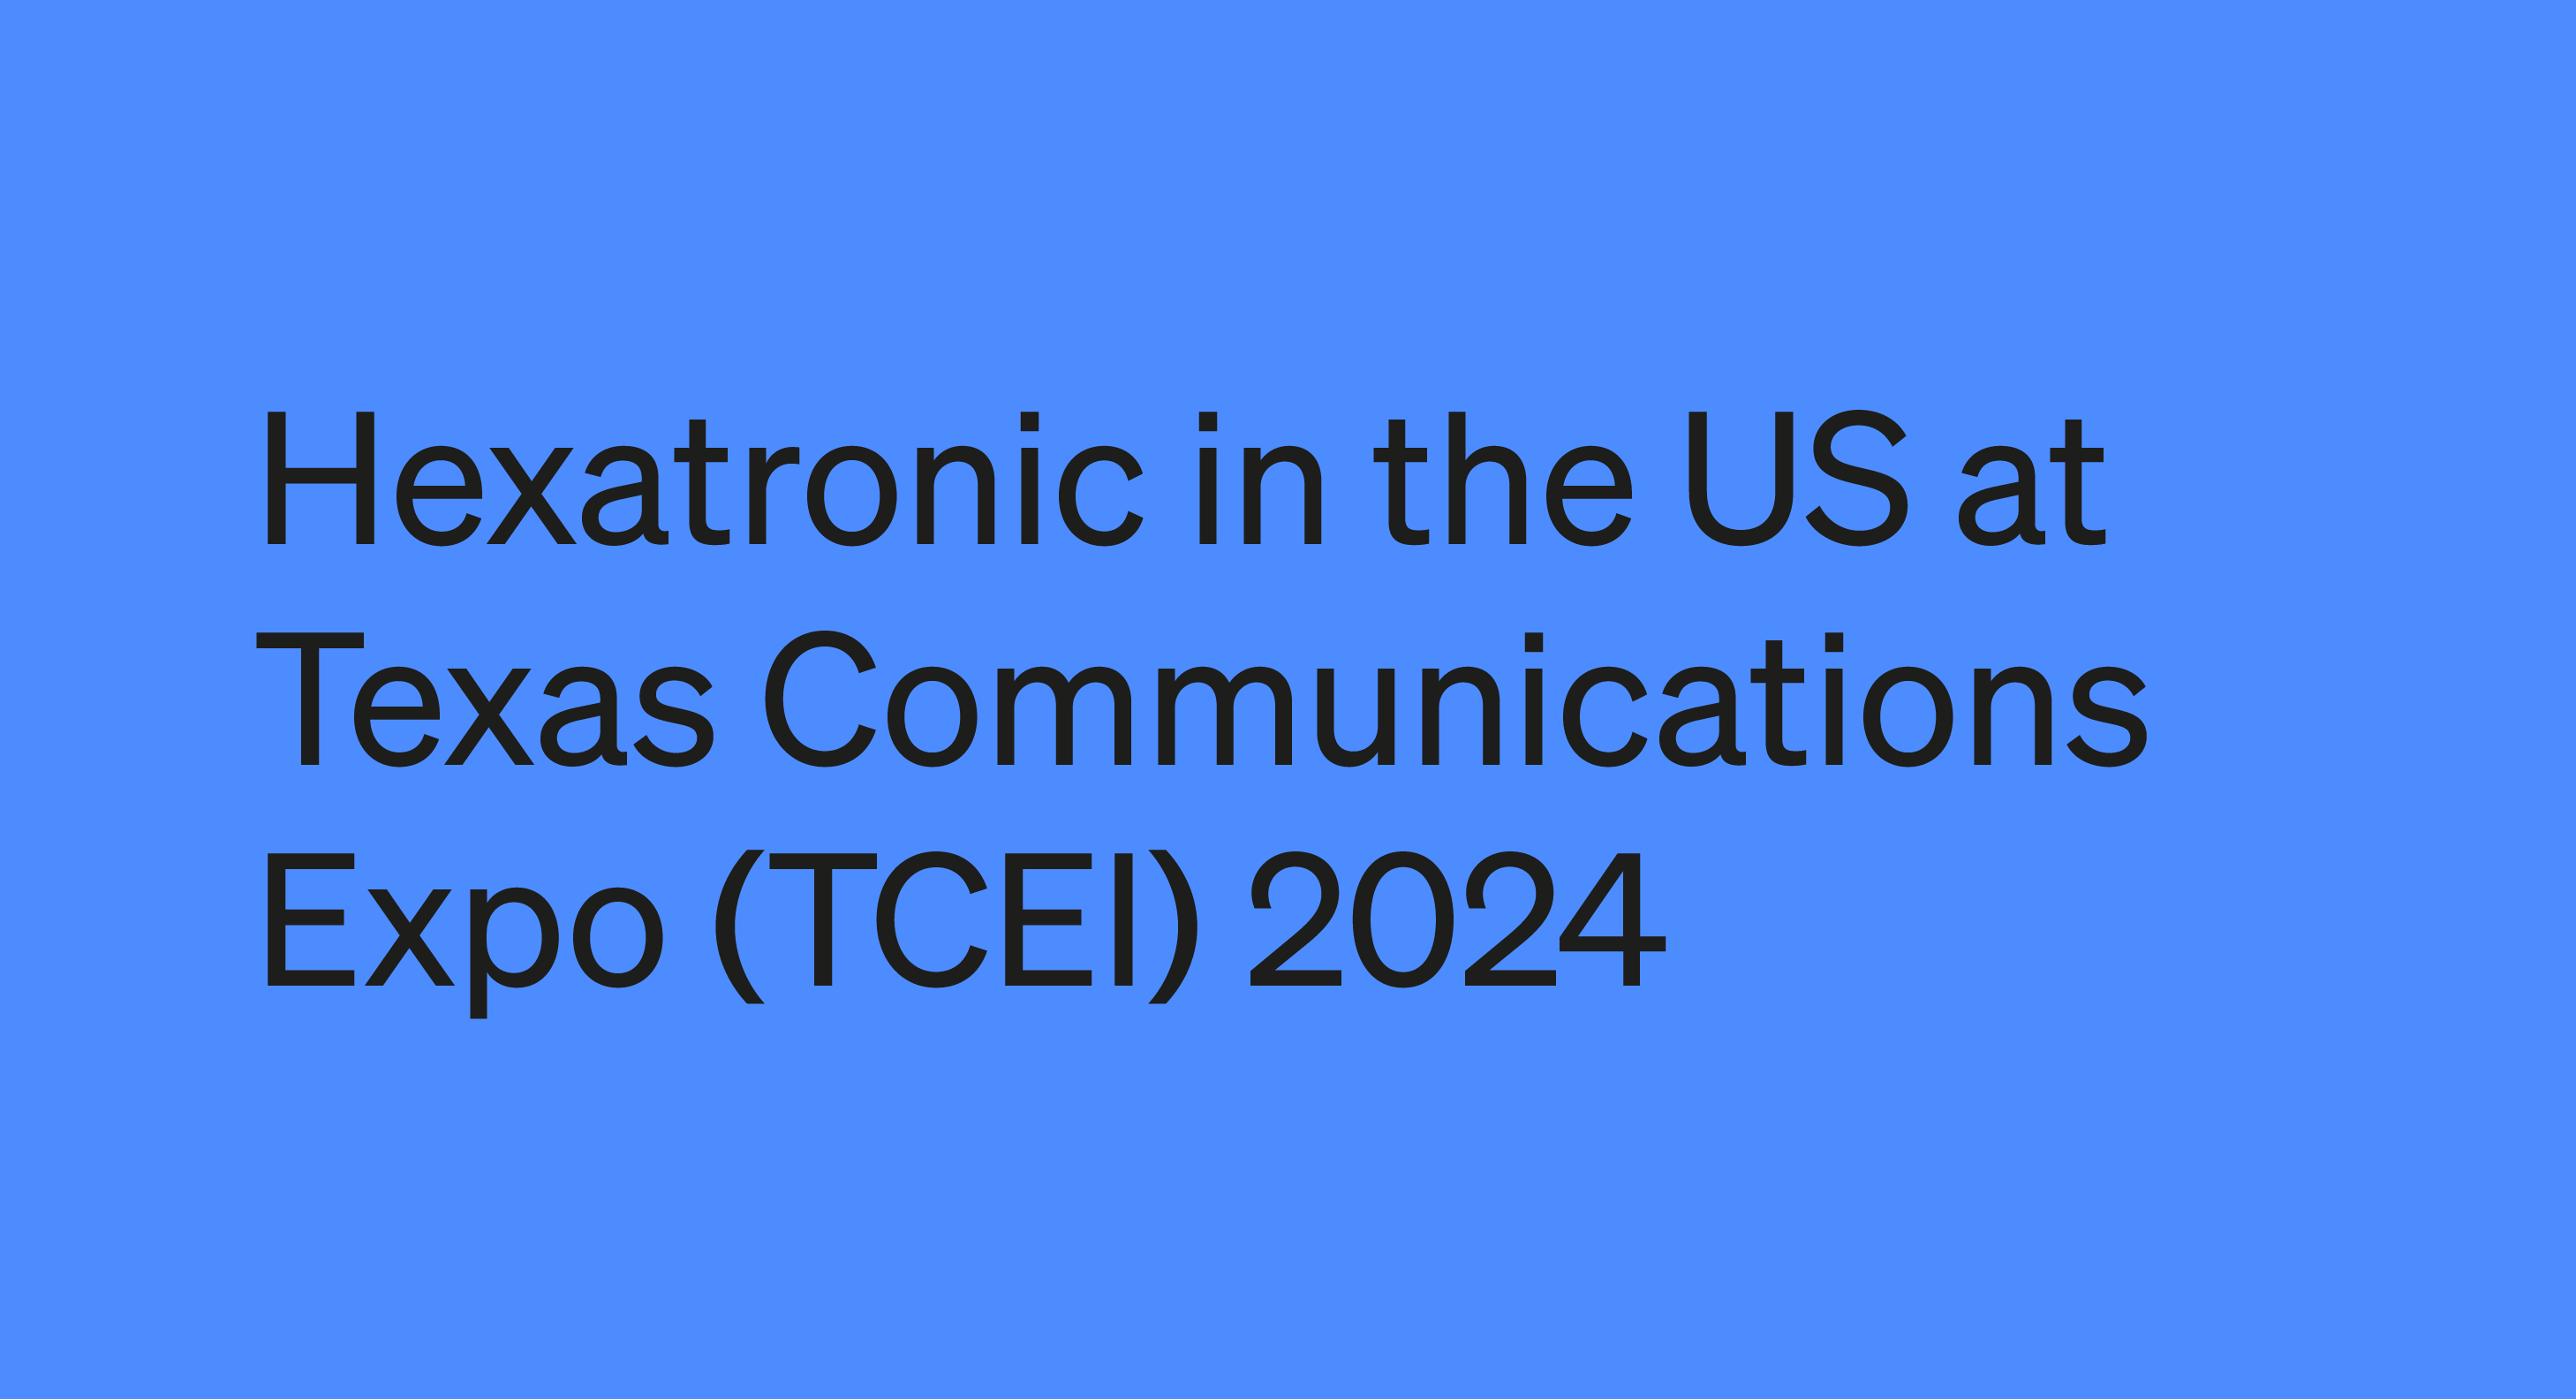 Texas Communications Expo (TCEI) 2024